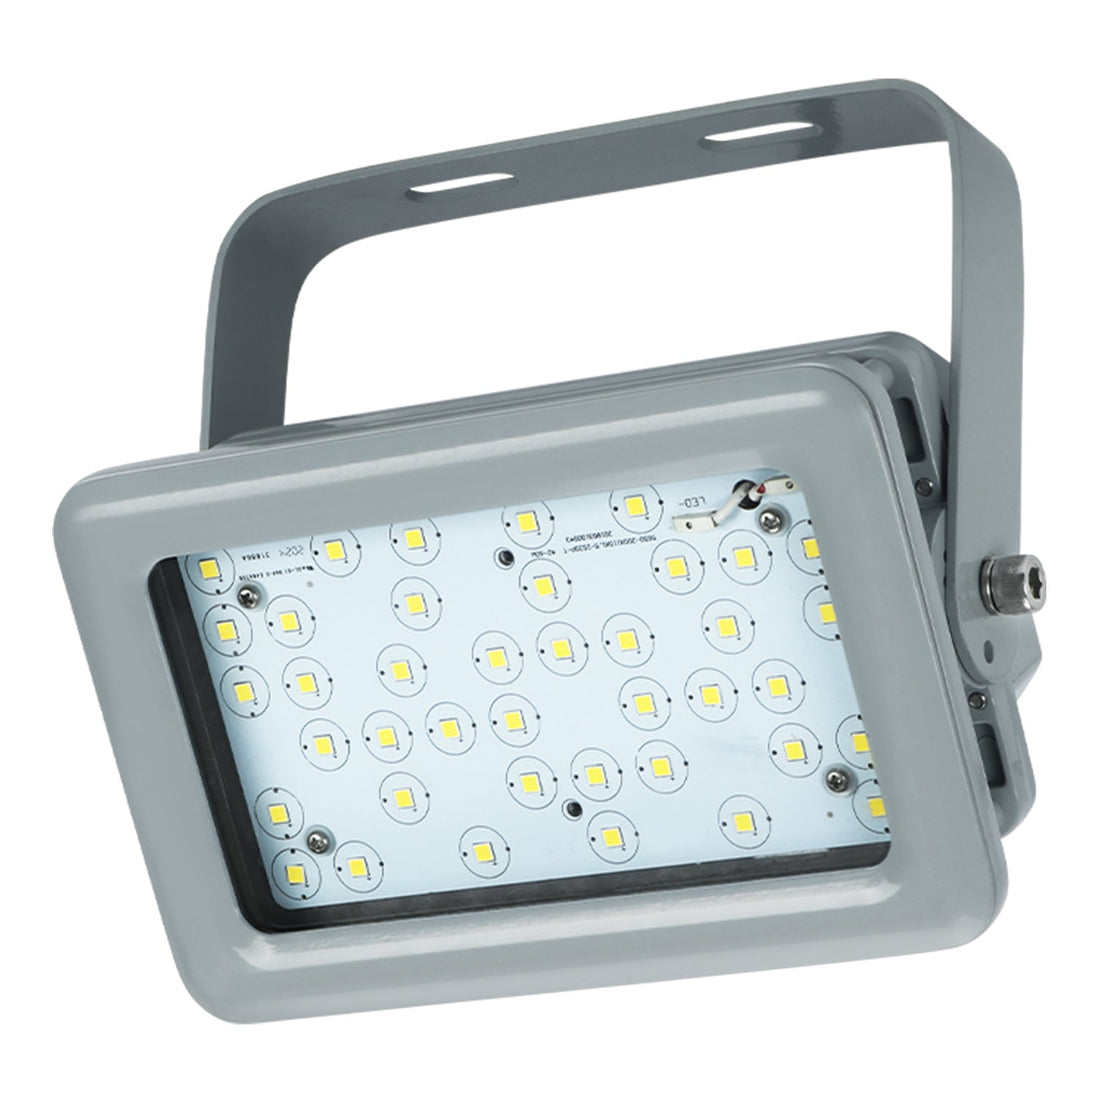 LED Explosion-Proof Flood Light - 150W - 5000K, 20250Lumens Non-Dimmable, IP66 Rated, Maximum Coverage and Durability